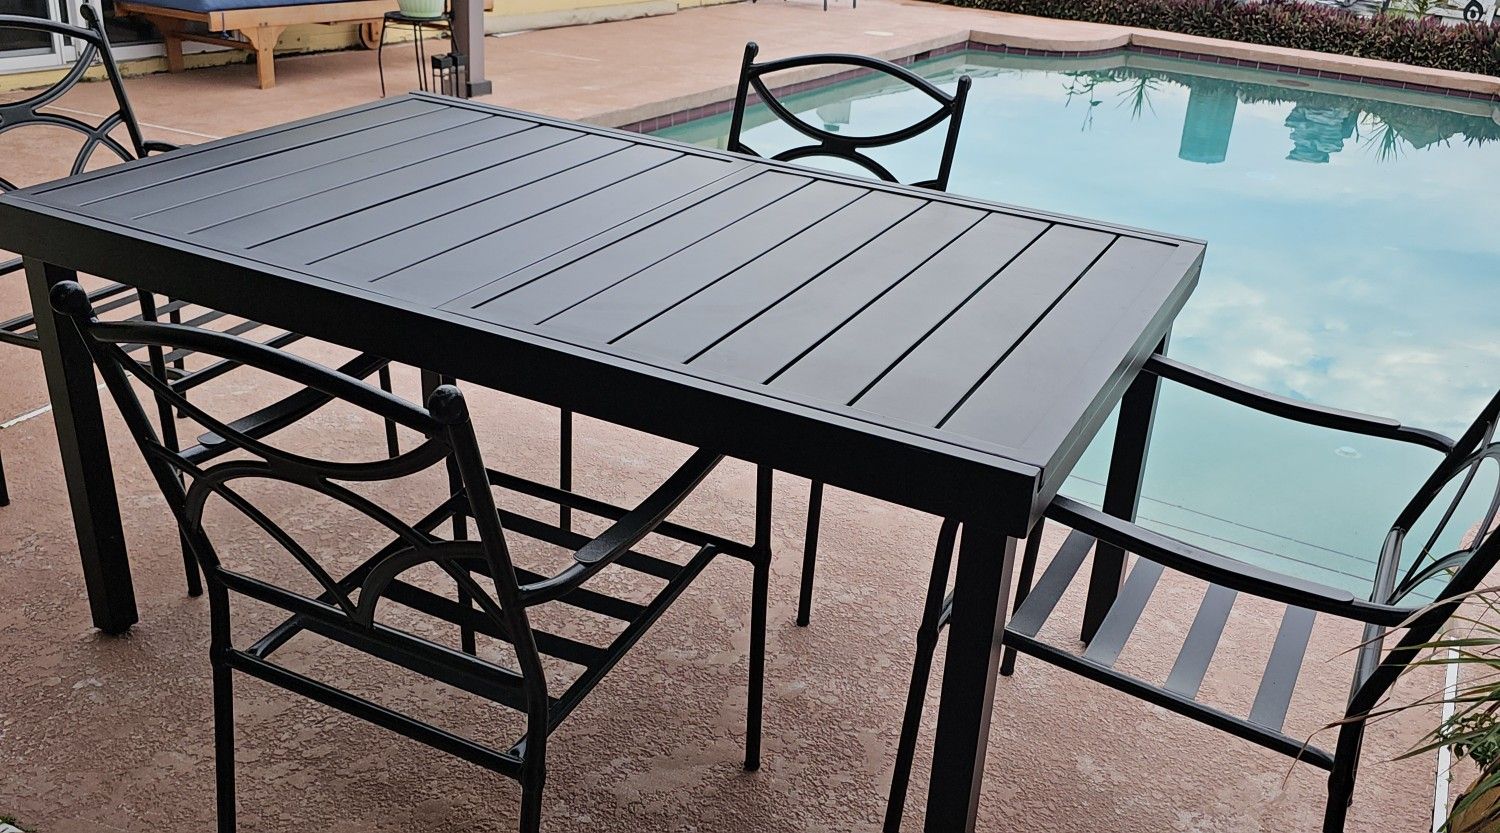 BLACK METAL PATIO FURNITURE SET.....EXPANDABLE TABLE AND 4 CHAIRS...NEW....$ 450